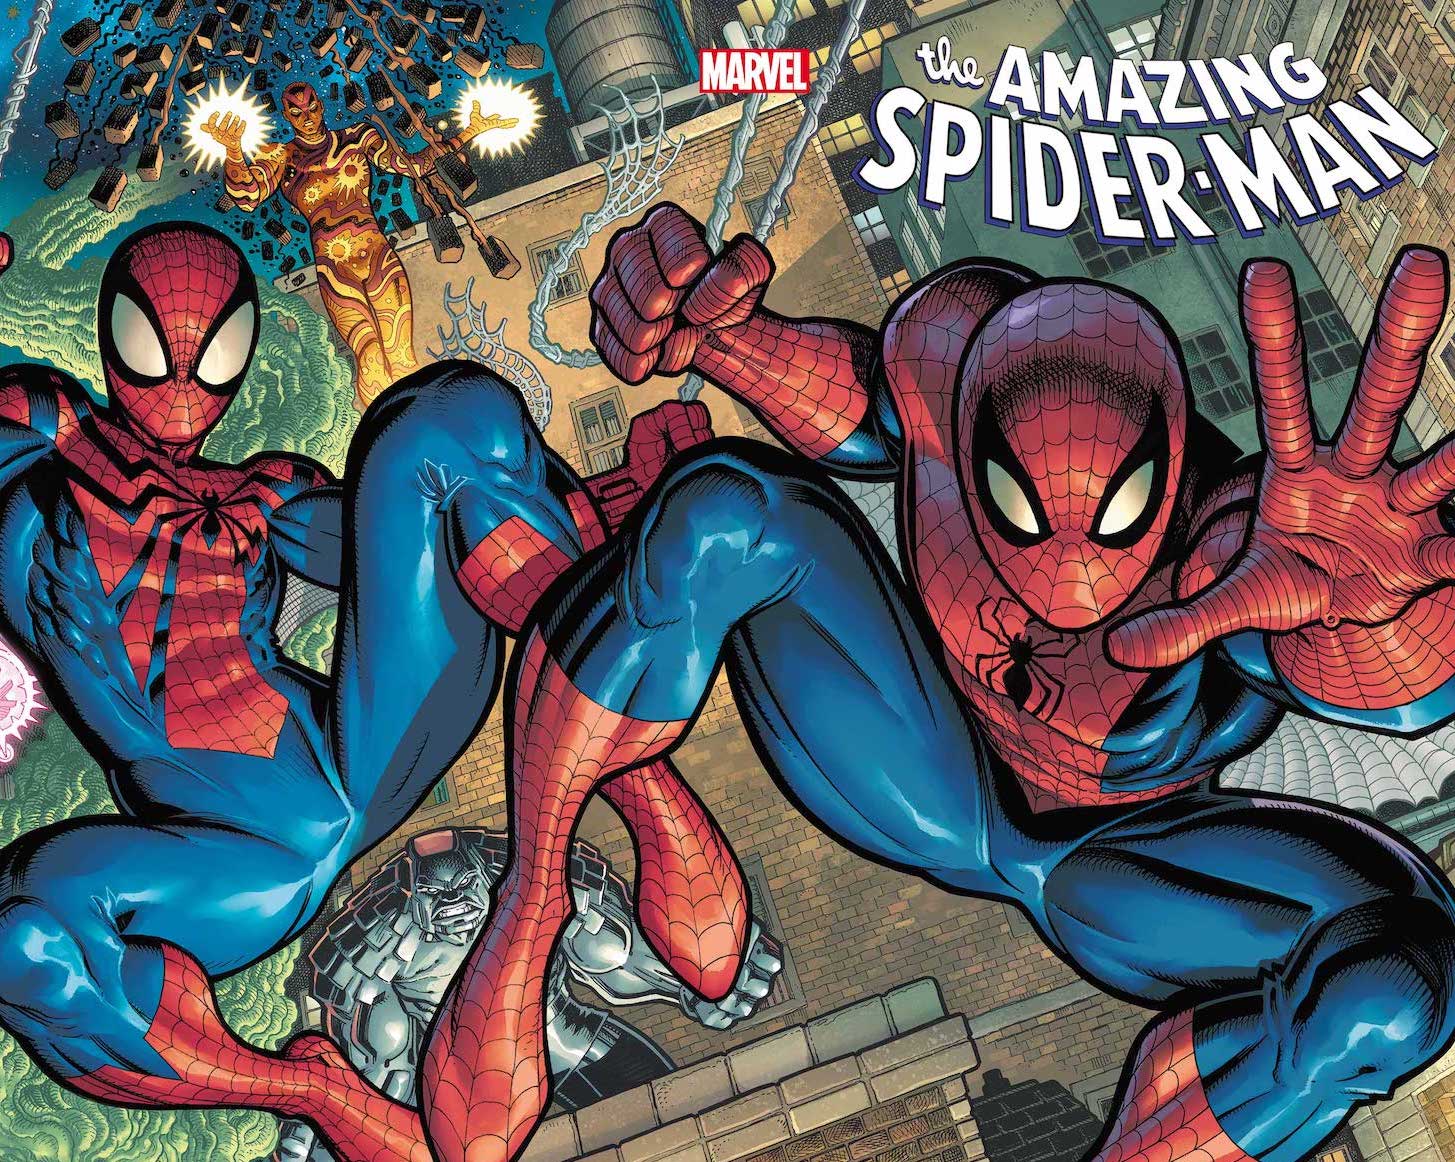 'Amazing Spider-Man' #75 offers an exciting new direction for Spidey